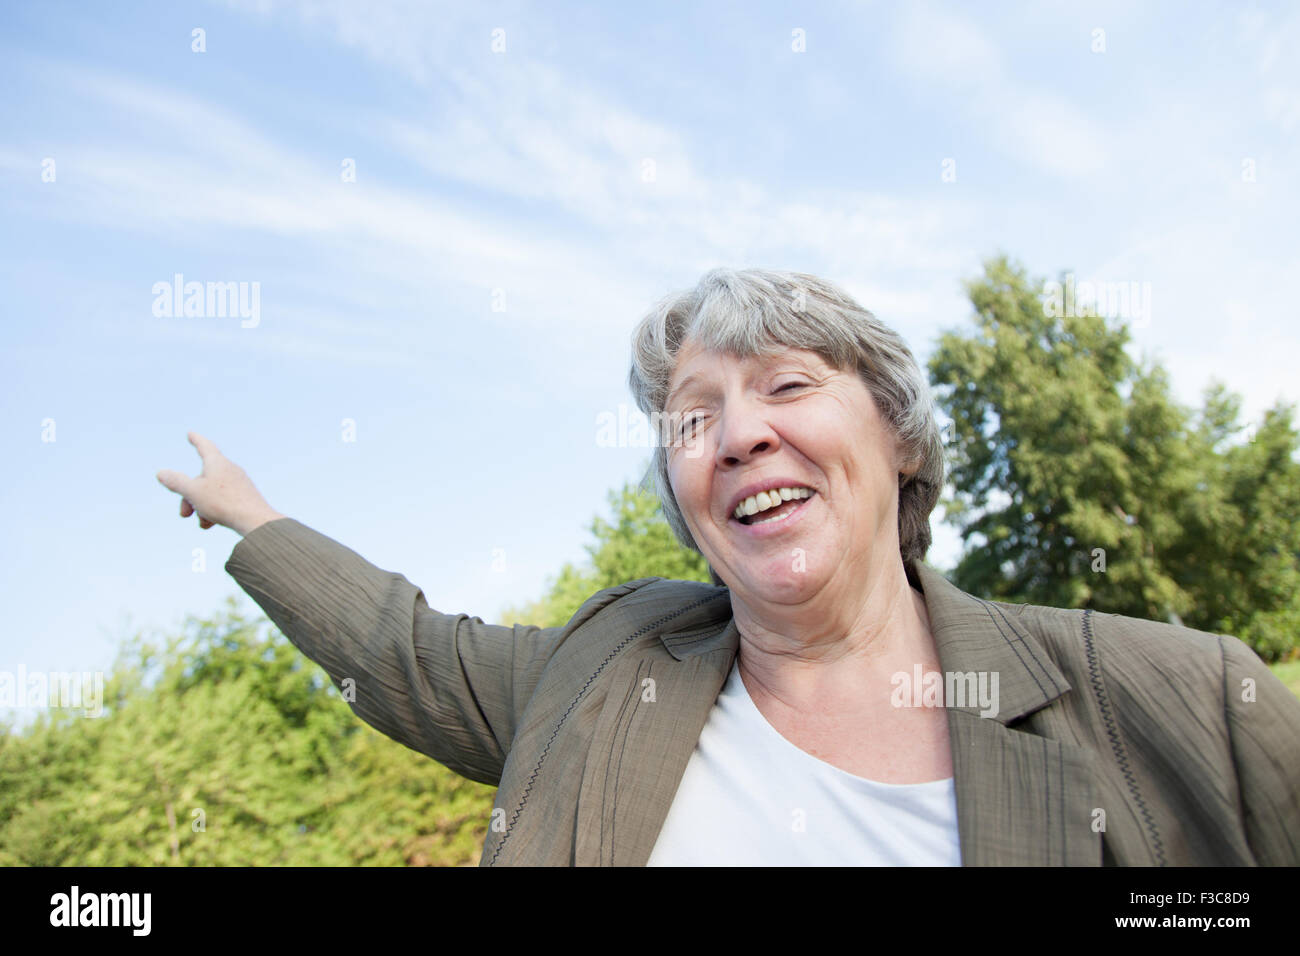 Old age woman pointing with finger Stock Photo